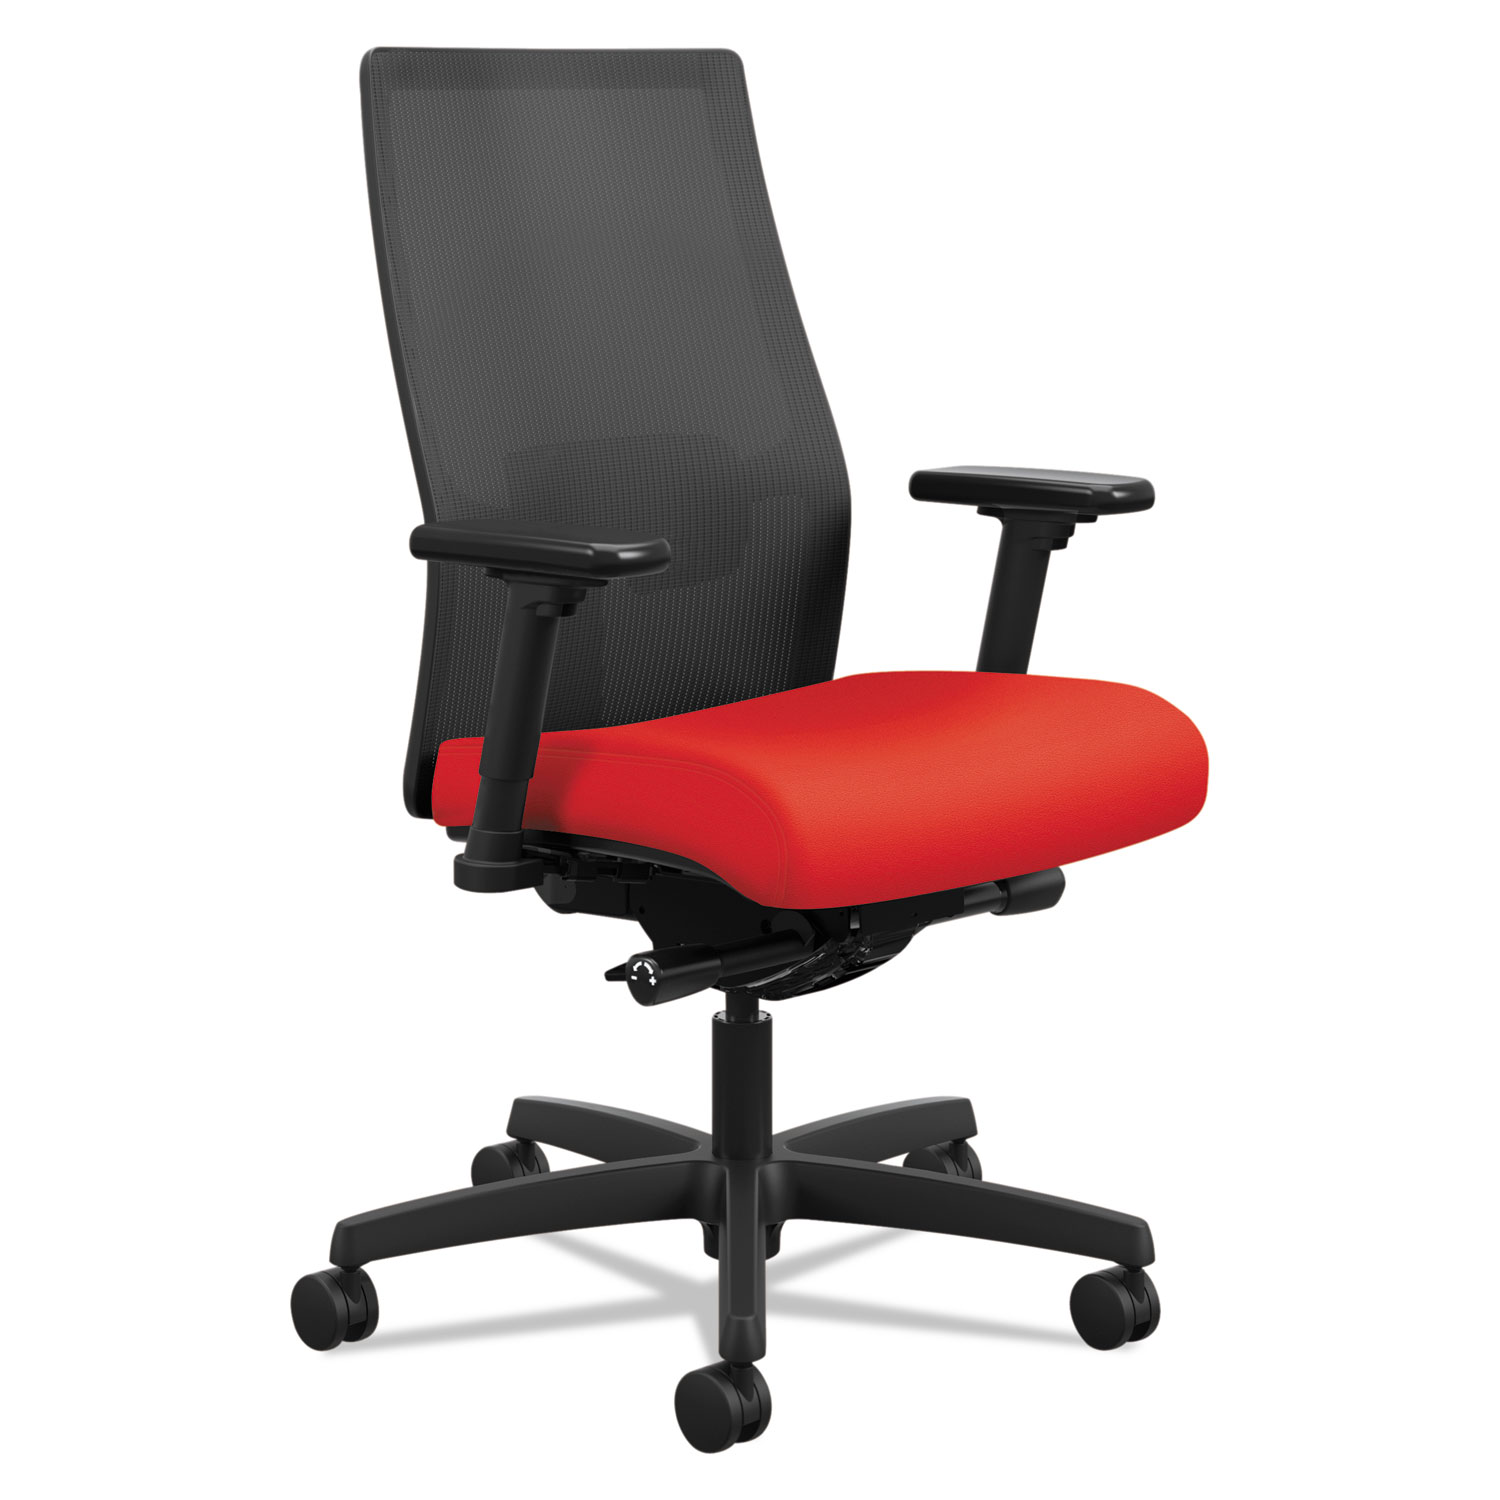  HON HONI2M2AMLC67TK Ignition 2.0 4-Way Stretch Mid-Back Mesh Task Chair, Supports up to 300 lbs., Ruby Seat, Black Back/Base (HONI2M2AMLC67TK) 